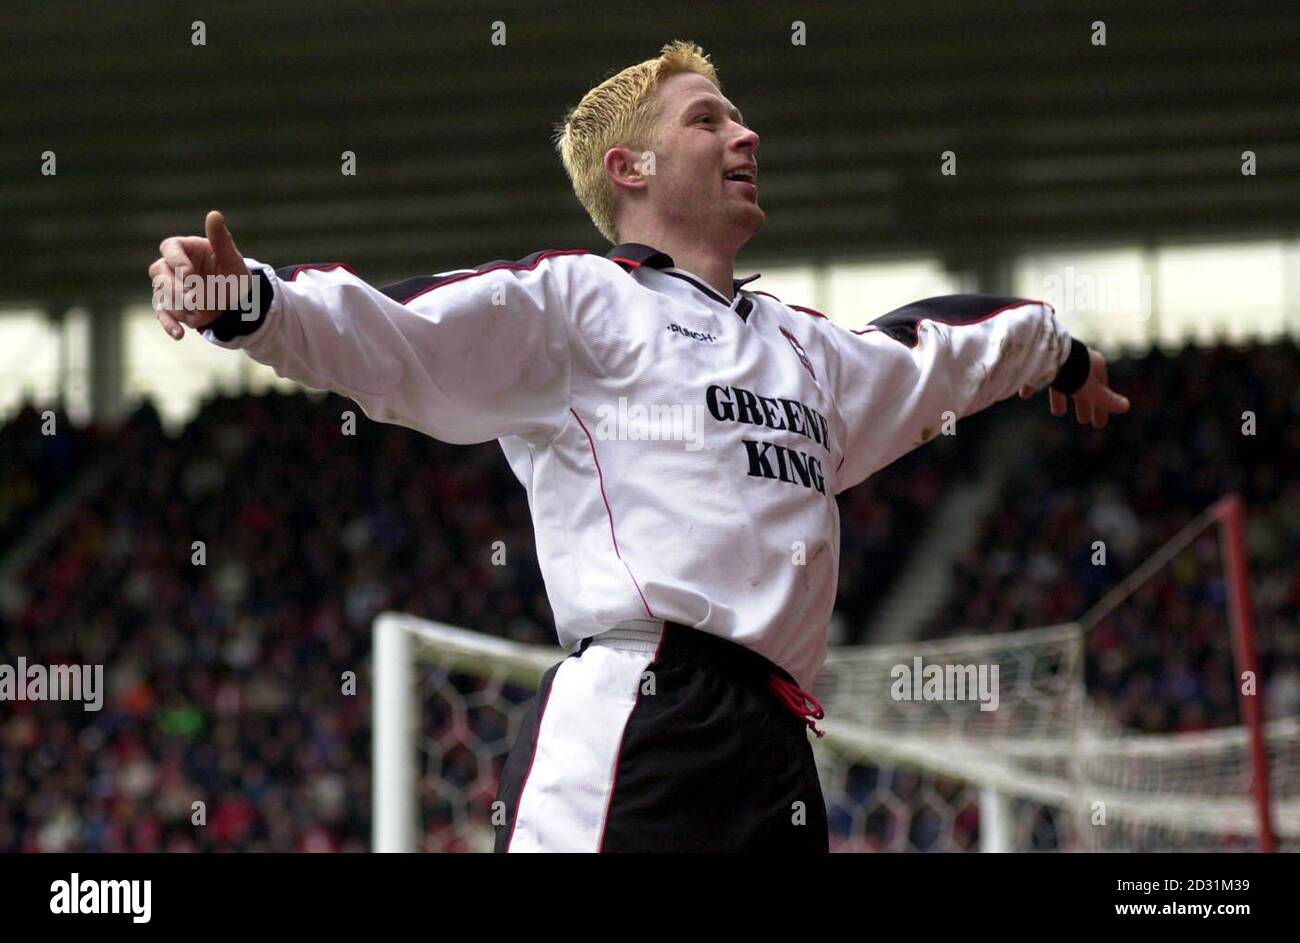 Ipswich Town's Alun Armstrong celebrates scoring against Middlesbrough during the Premiership football match at The Riverside Stadium, Middlesbrough. Stock Photo